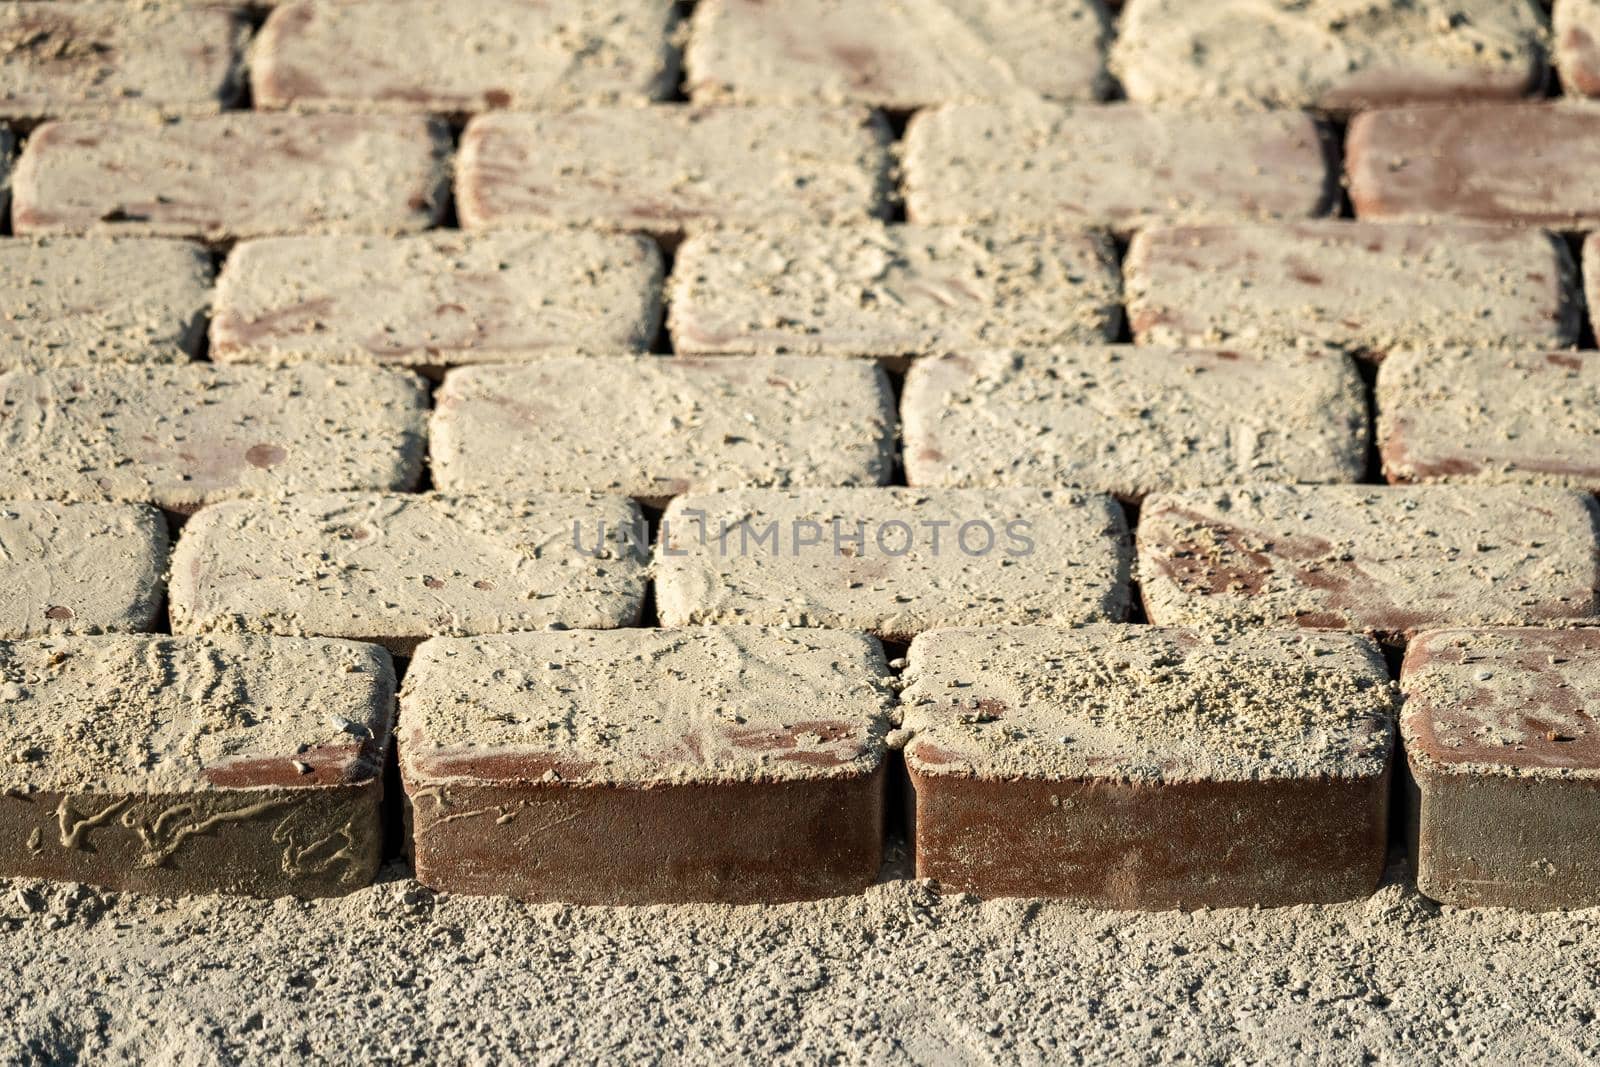 Abstract photo of bricks in the sunlight